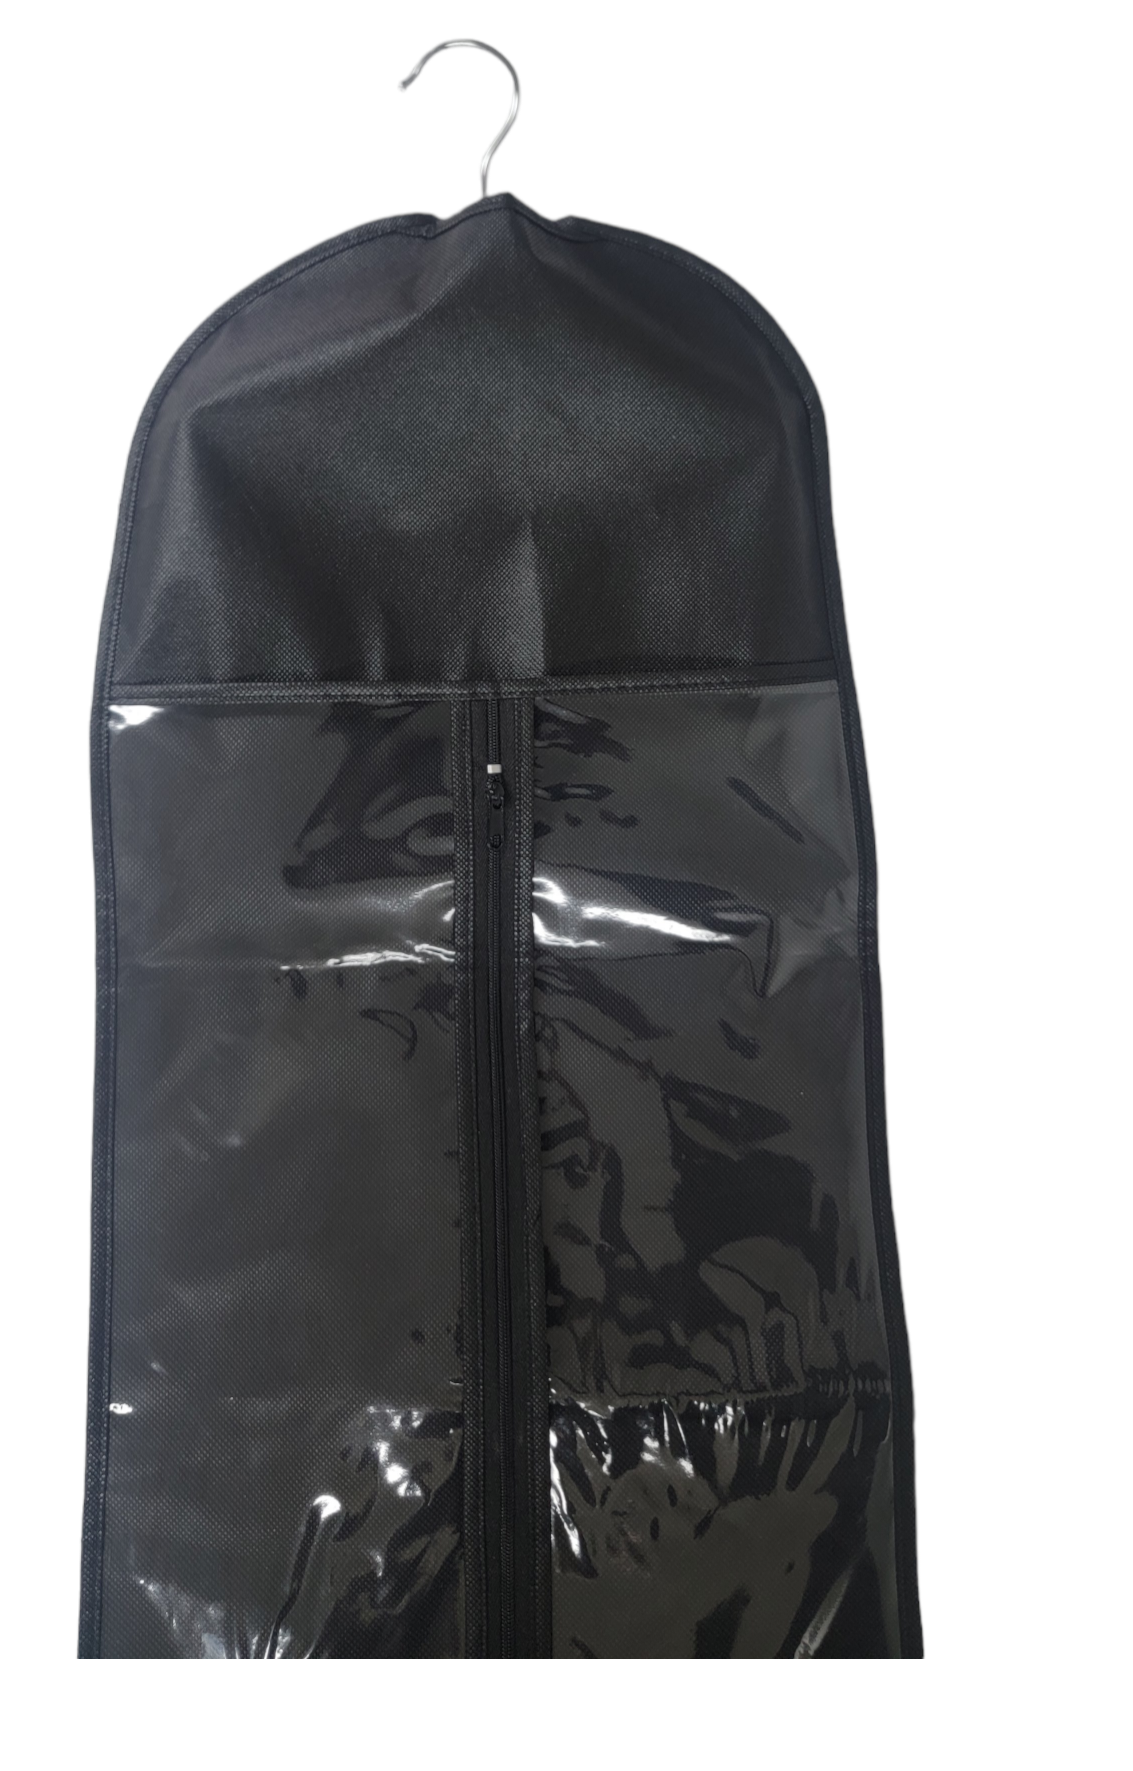 Premium Wig Storage Bag: Keep Your Hair Extensions/Hair Toppers Dust-Free, Safe and Stylish